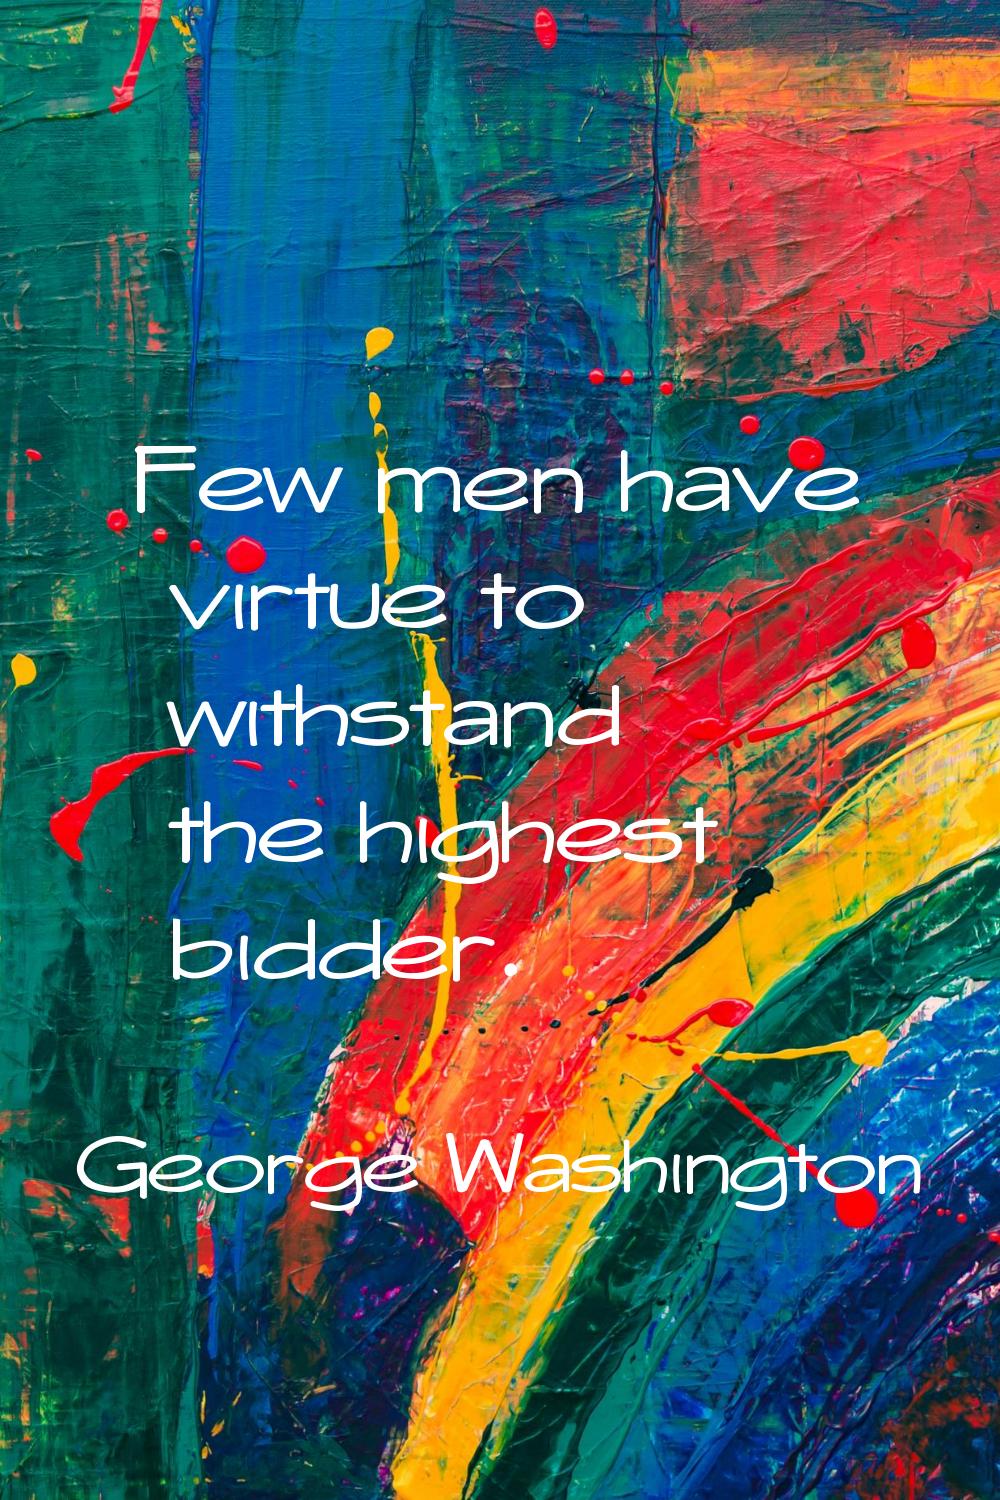 Few men have virtue to withstand the highest bidder.